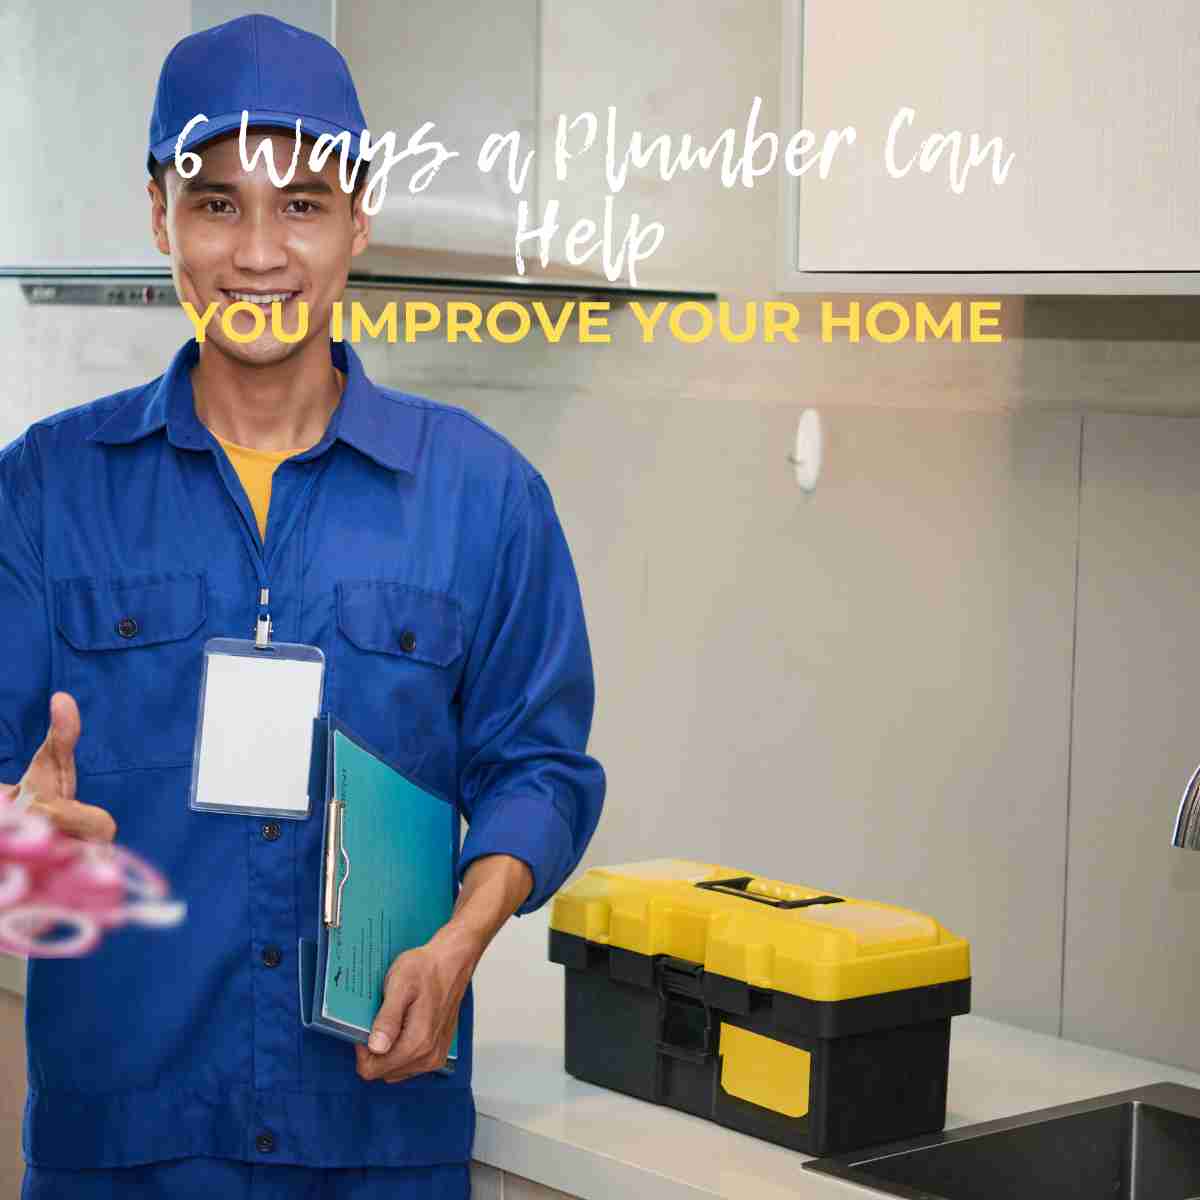 Plumber Can Help You Improve Your Home